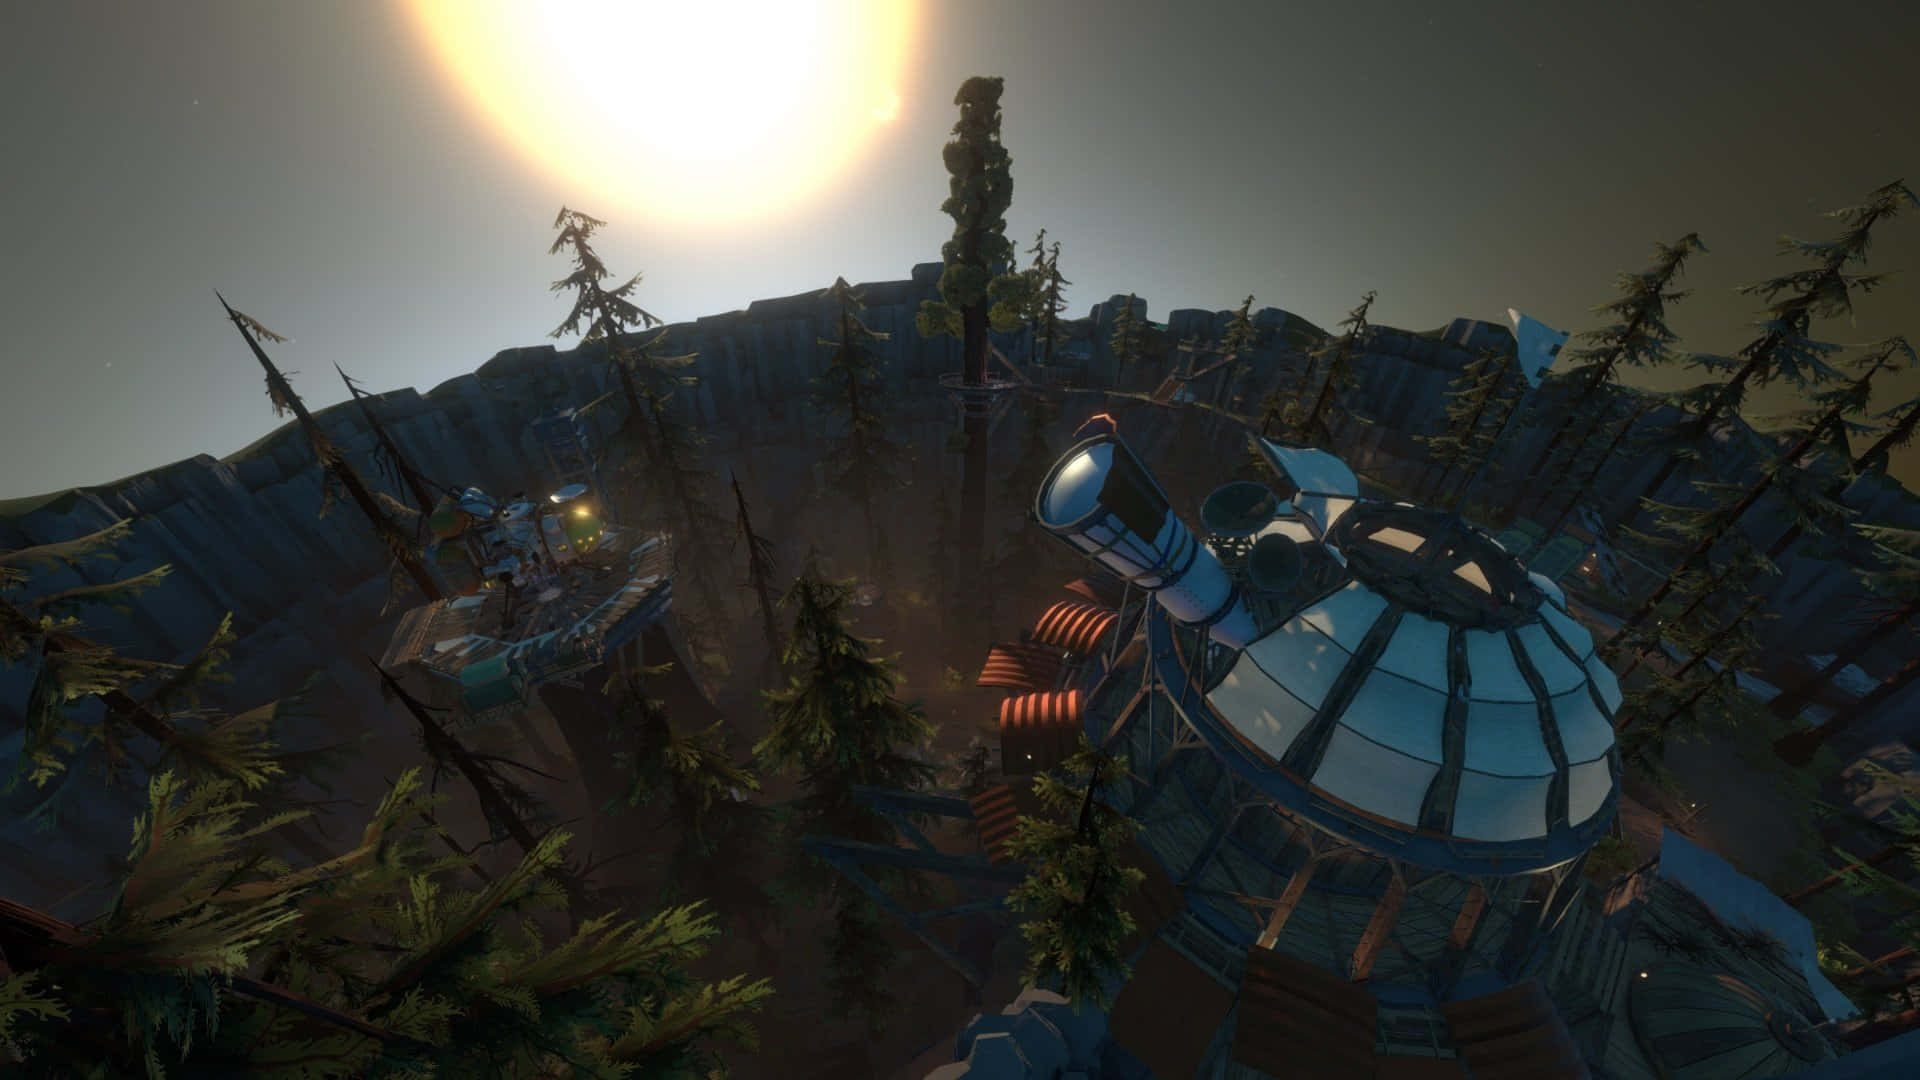 Explore The Depths Of Space In The Critically Acclaimed Indie Title, Outer Wilds. Wallpaper